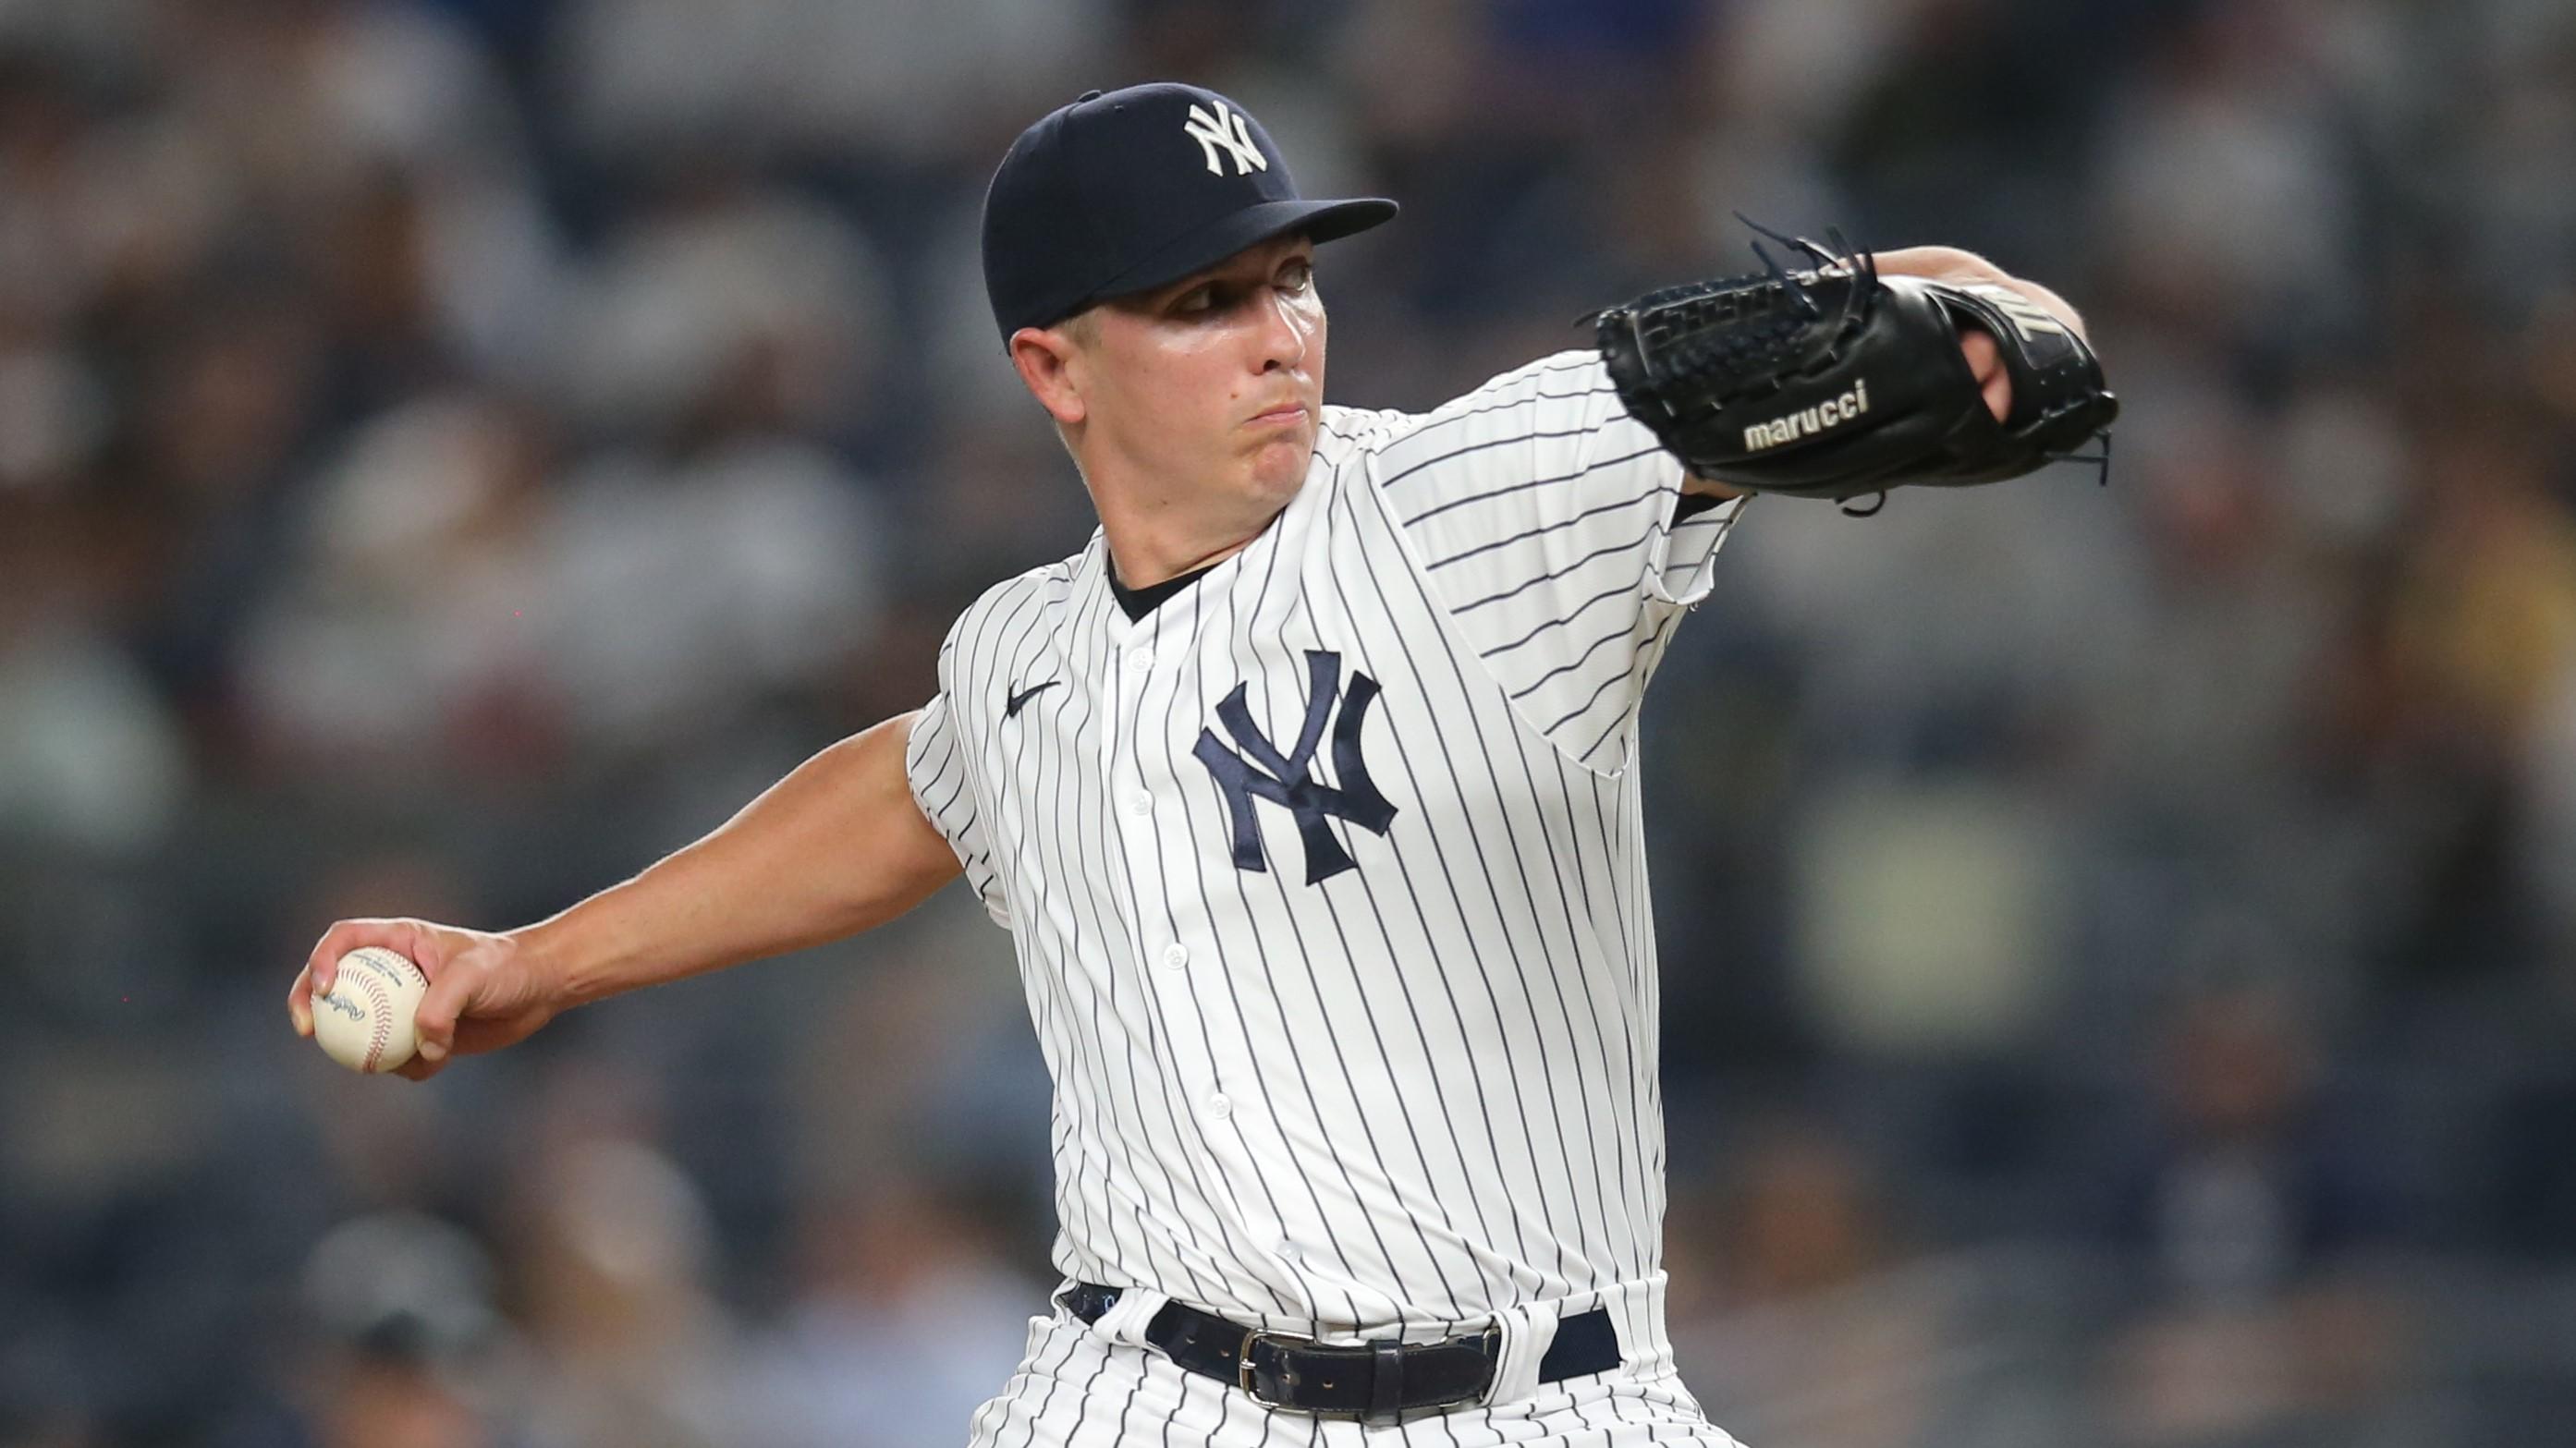 Aug 5, 2021; Bronx, New York, USA; New York Yankees relief pitcher Chad Green (57) throws against the Seattle Mariners during the sixth inning at Yankee Stadium. Mandatory Credit: Brad Penner-USA TODAY Sports / Brad Penner-USA TODAY Sports